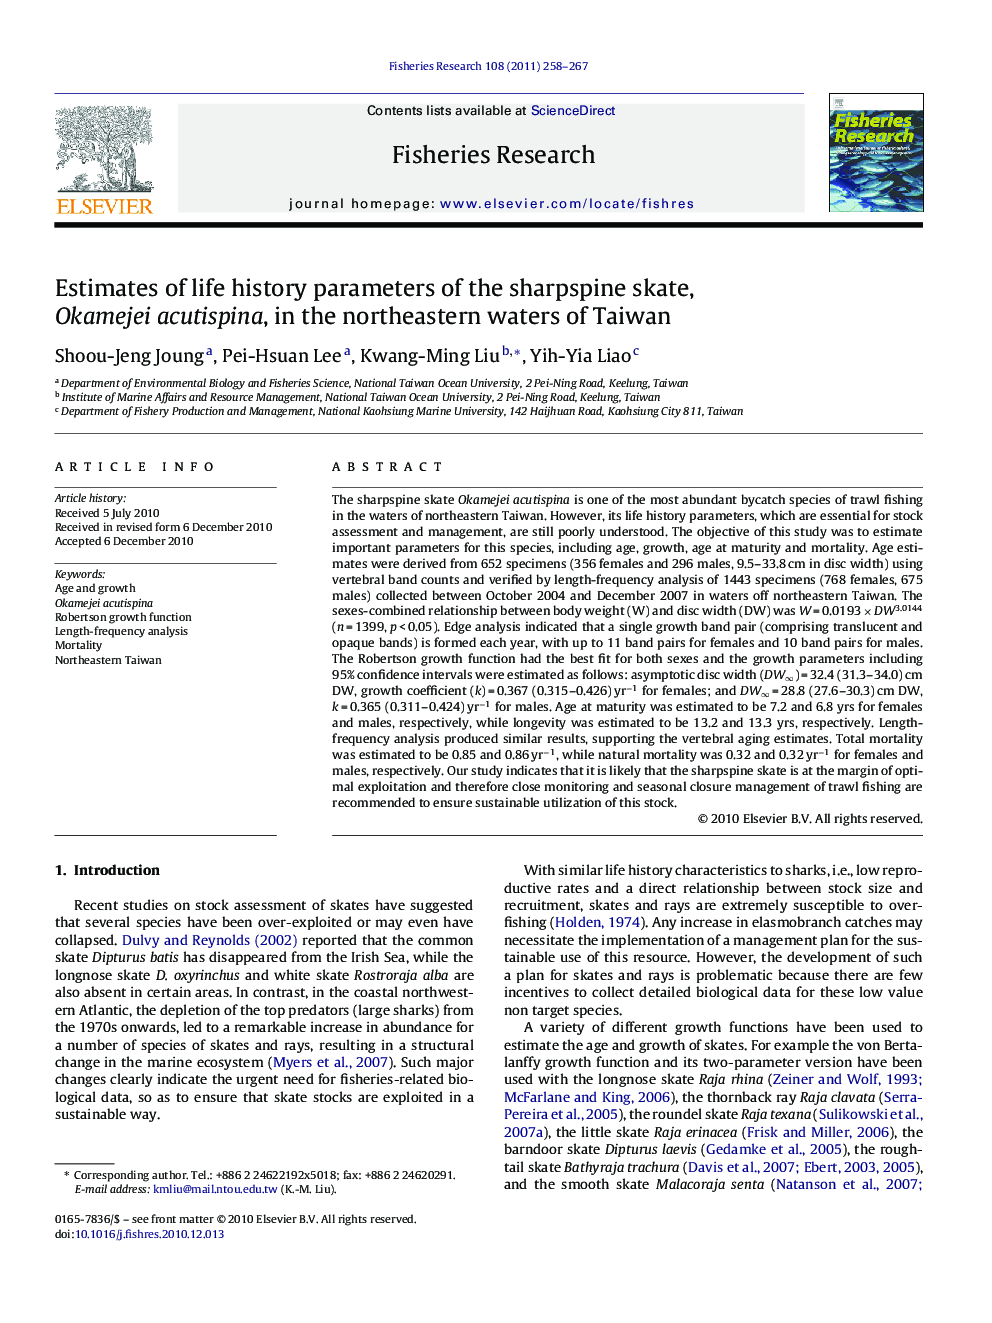 Estimates of life history parameters of the sharpspine skate, Okamejei acutispina, in the northeastern waters of Taiwan